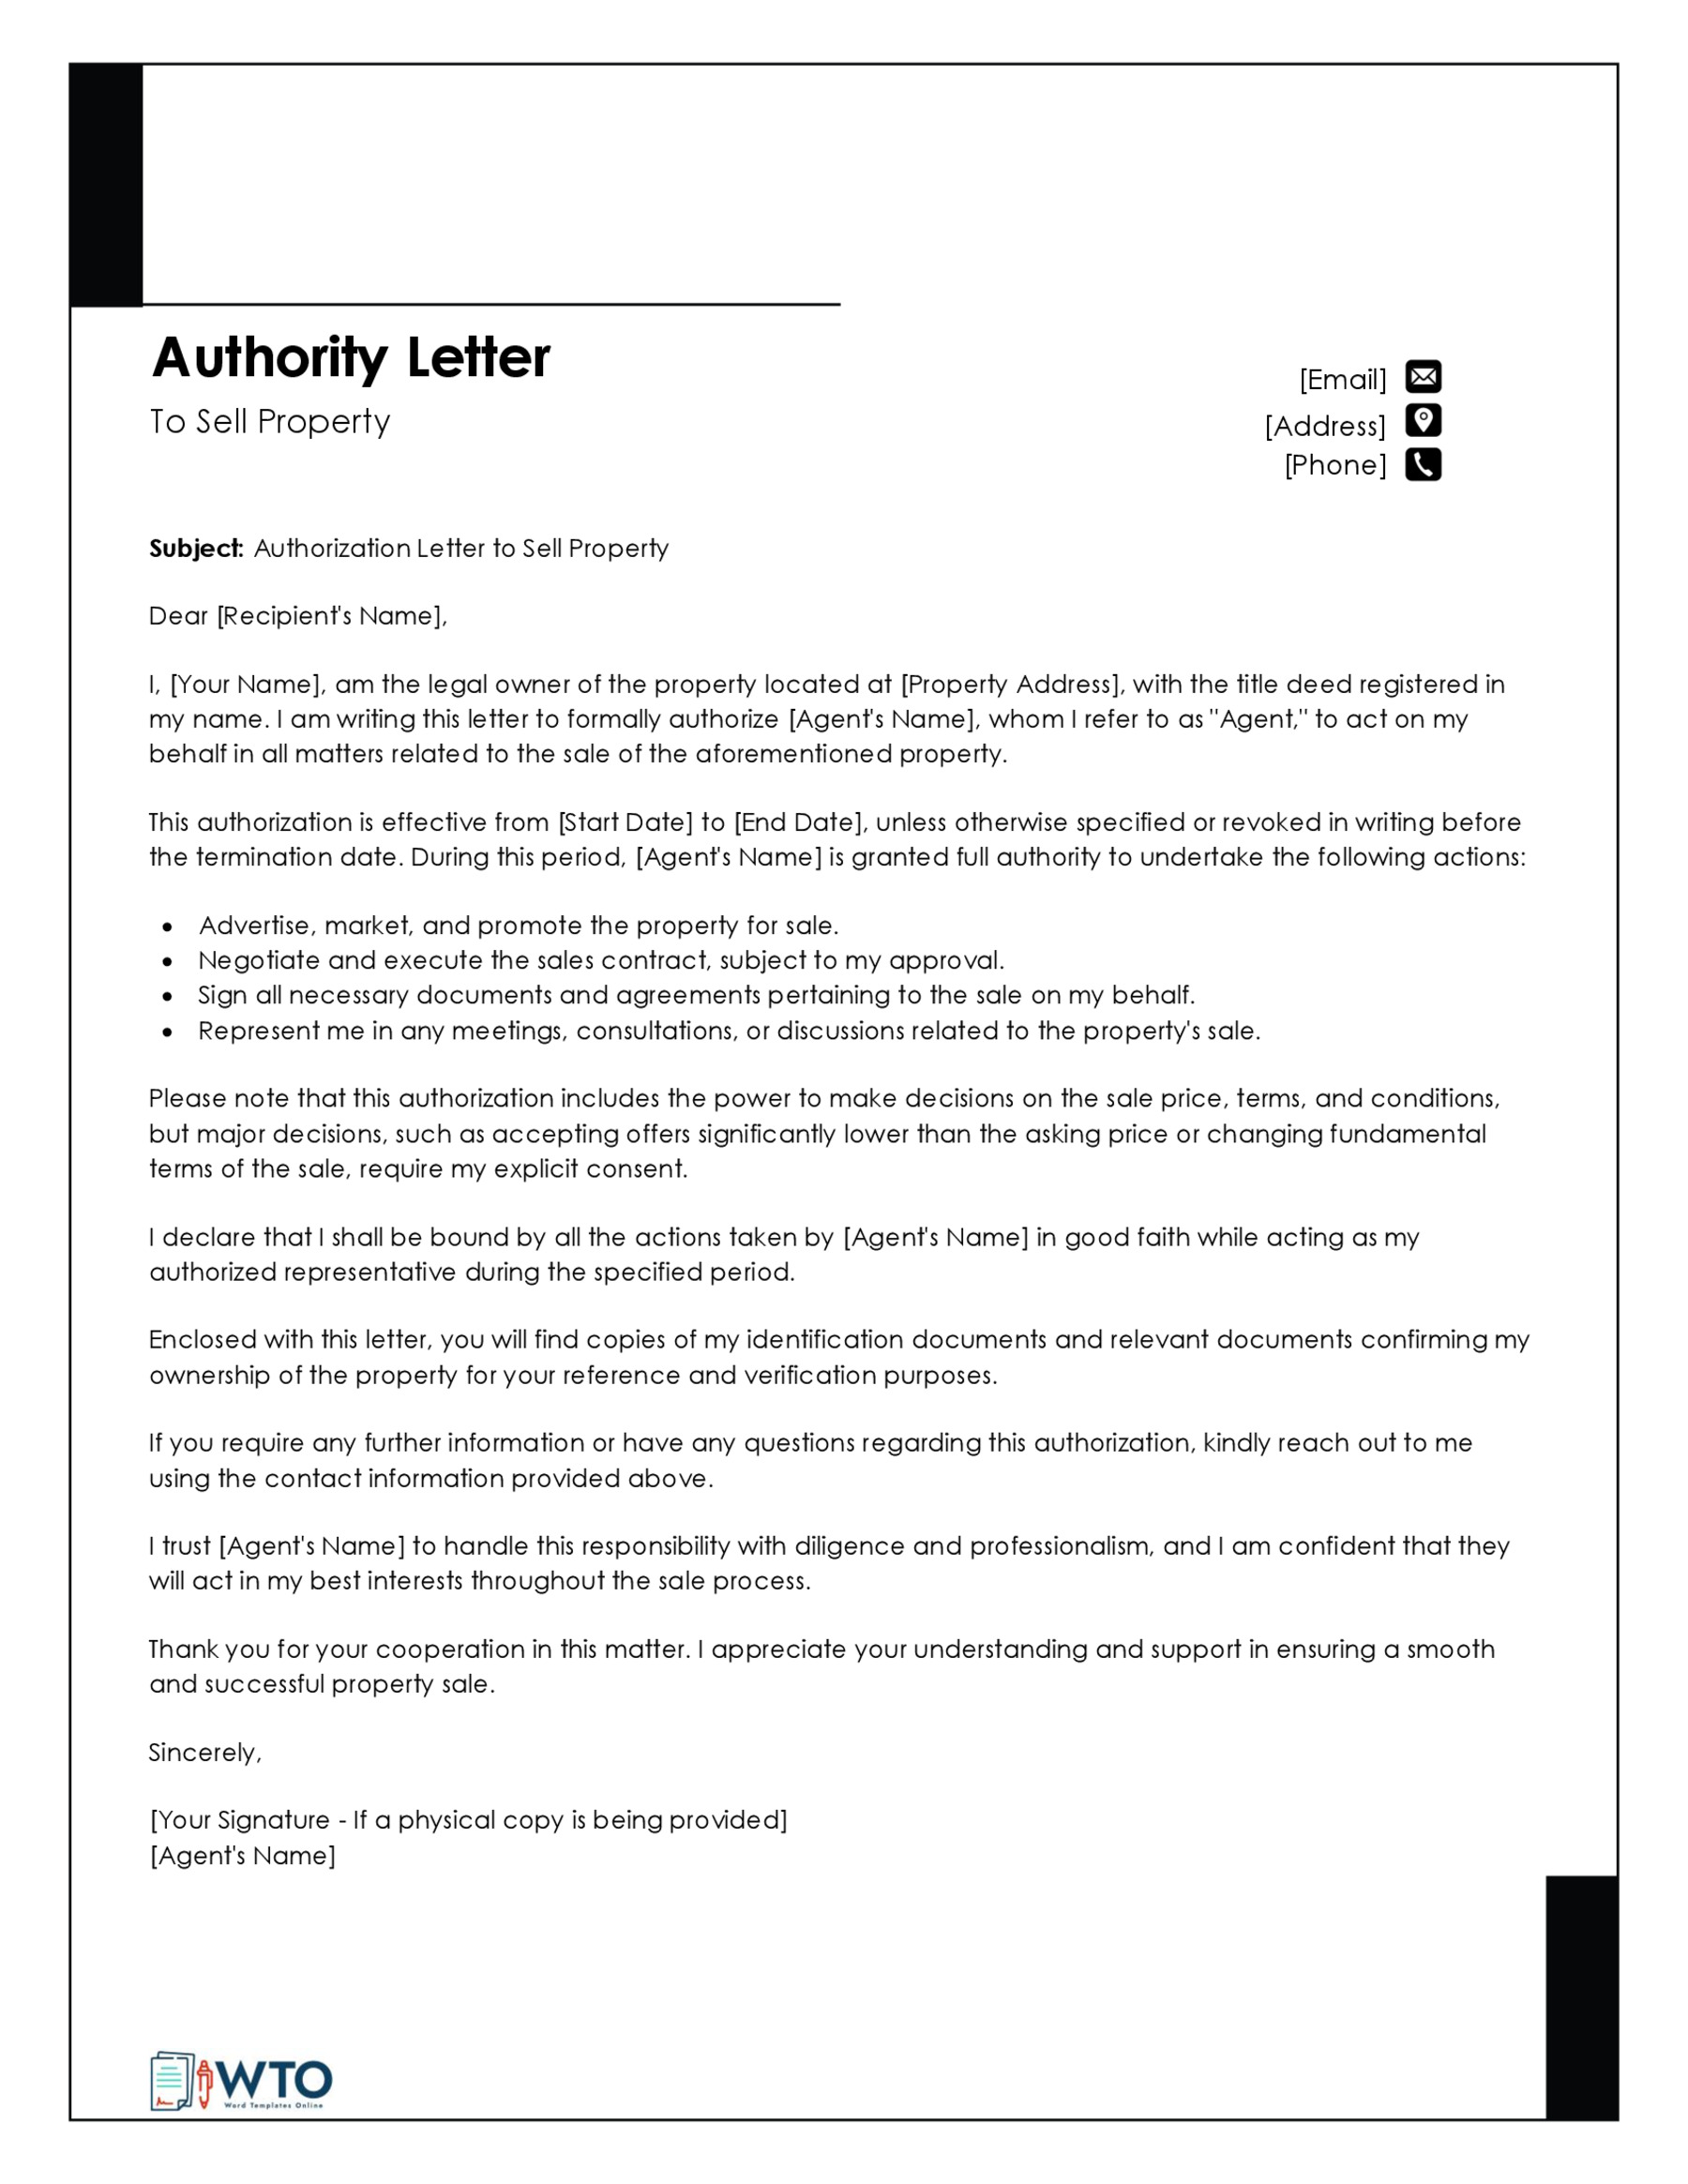 Authorization Letter to Sell PropertyTemplate-Download Free in word format